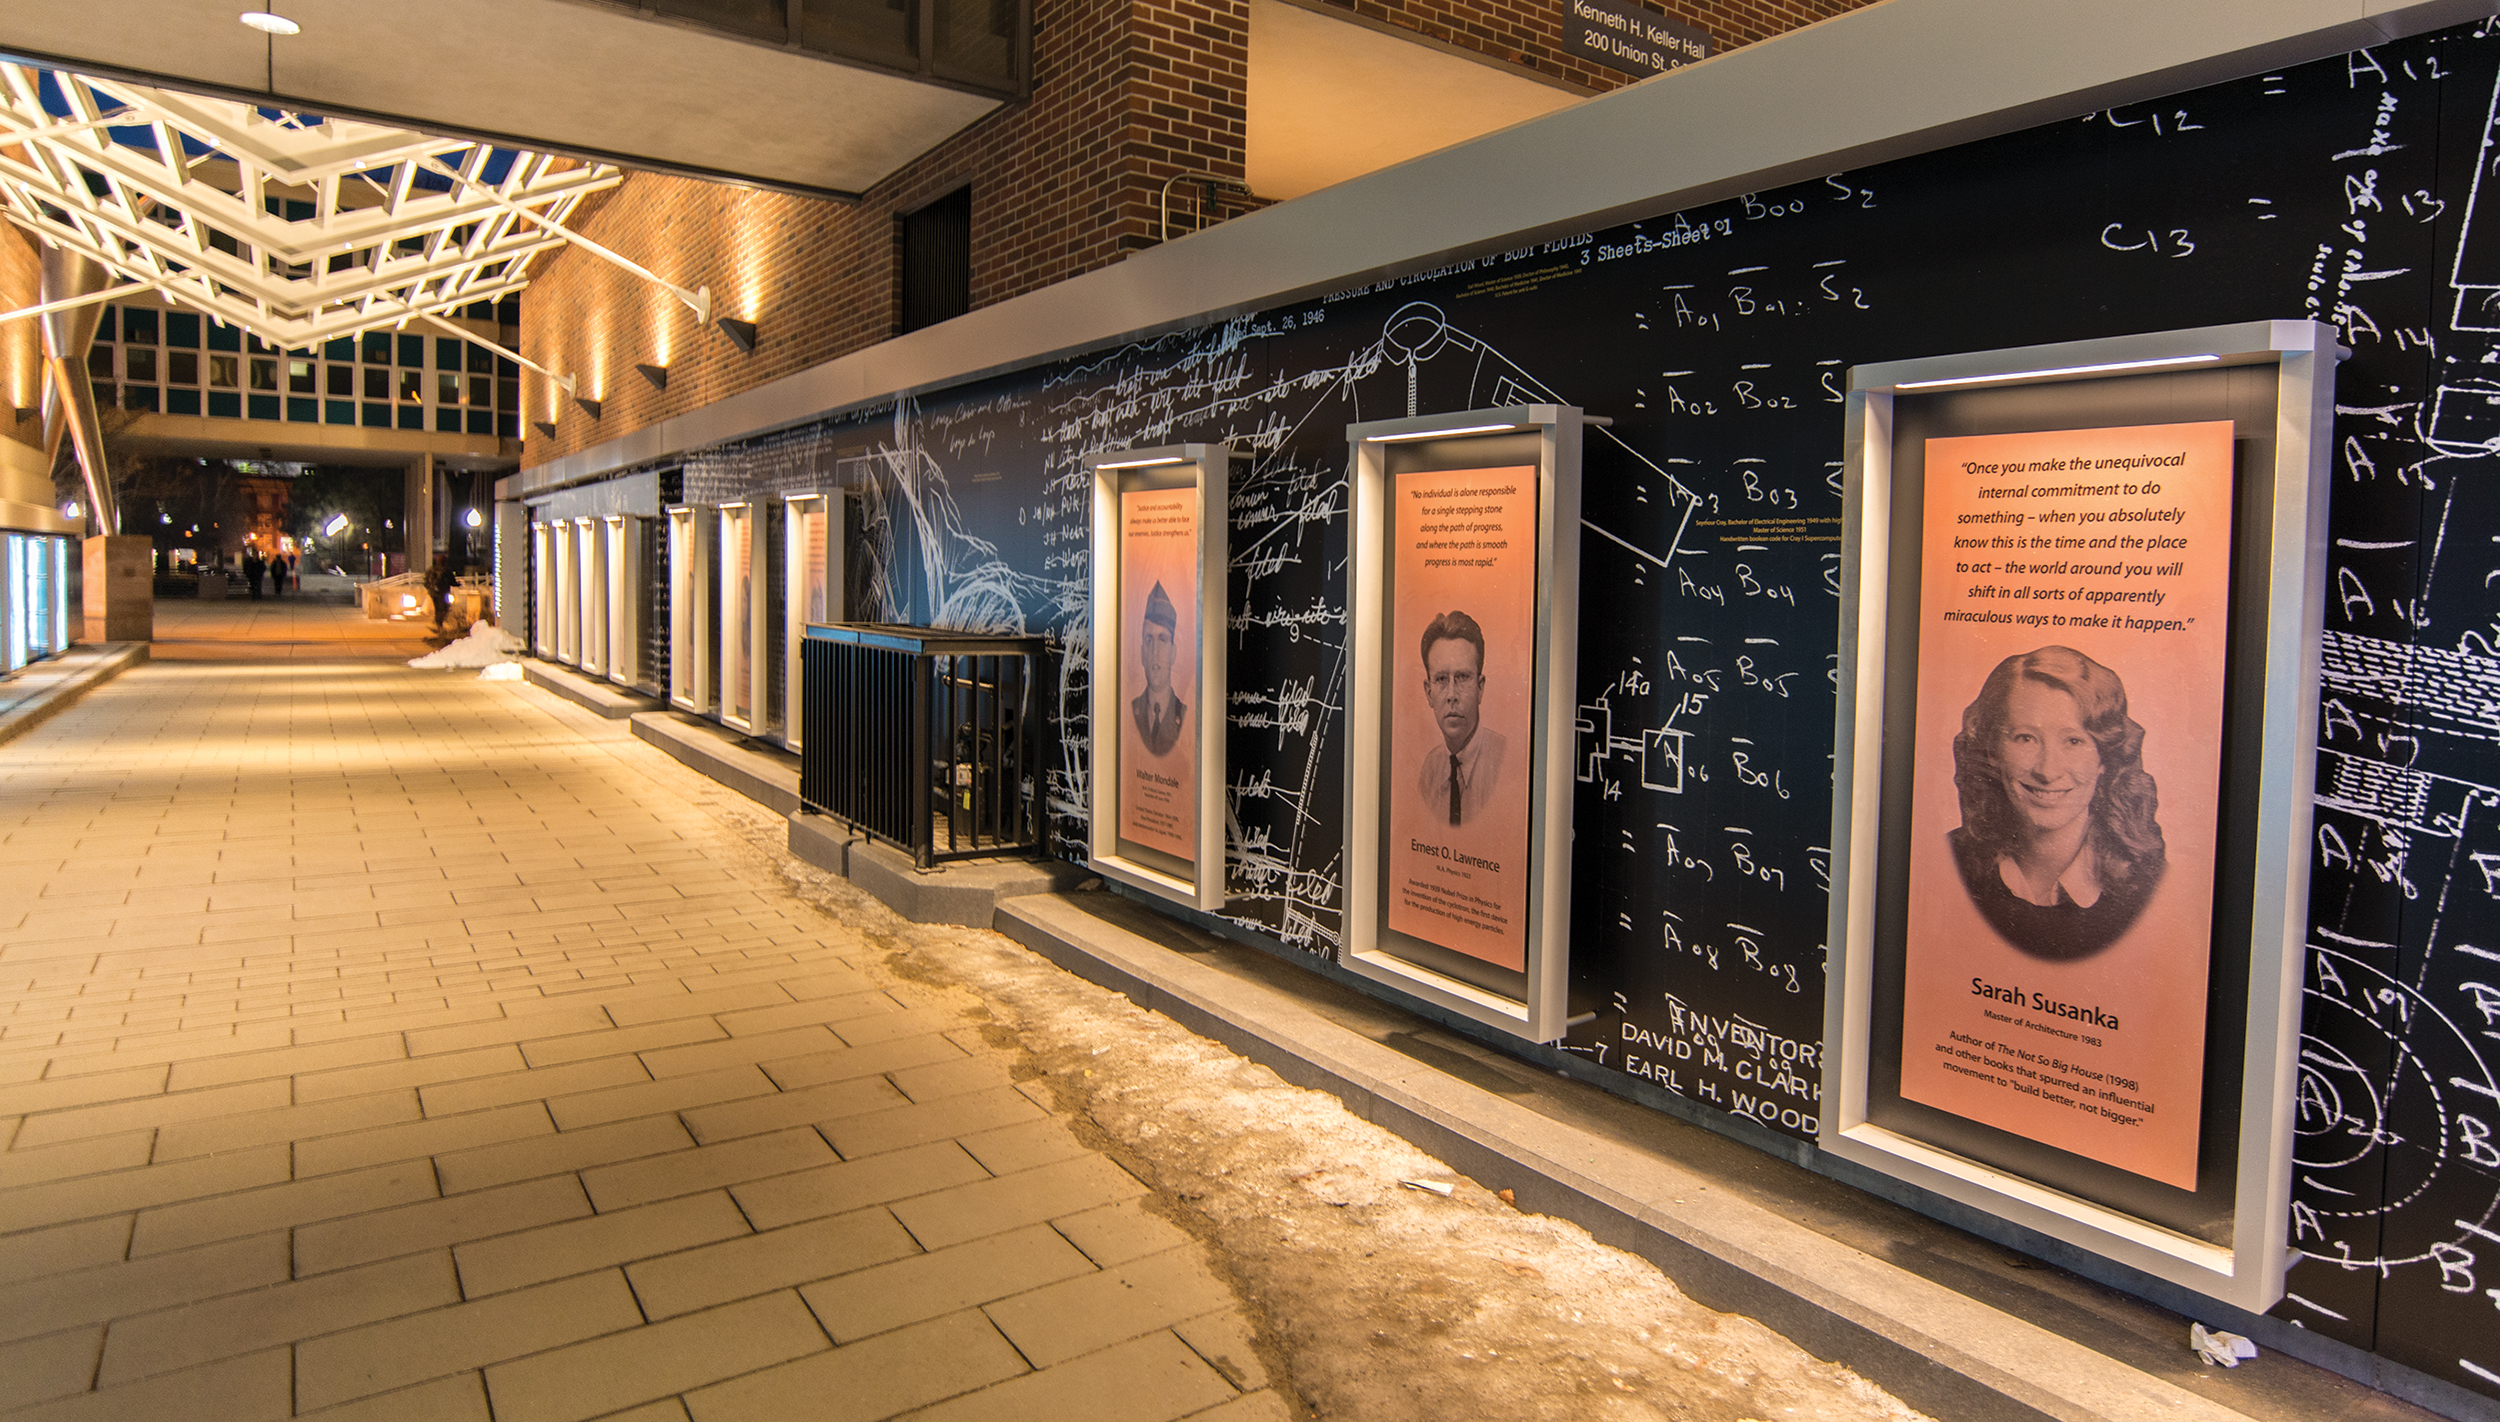 This “wall of discovery” on the University of Minnesota campus includes a “discovery gallery” of illuminated displays (lower right).